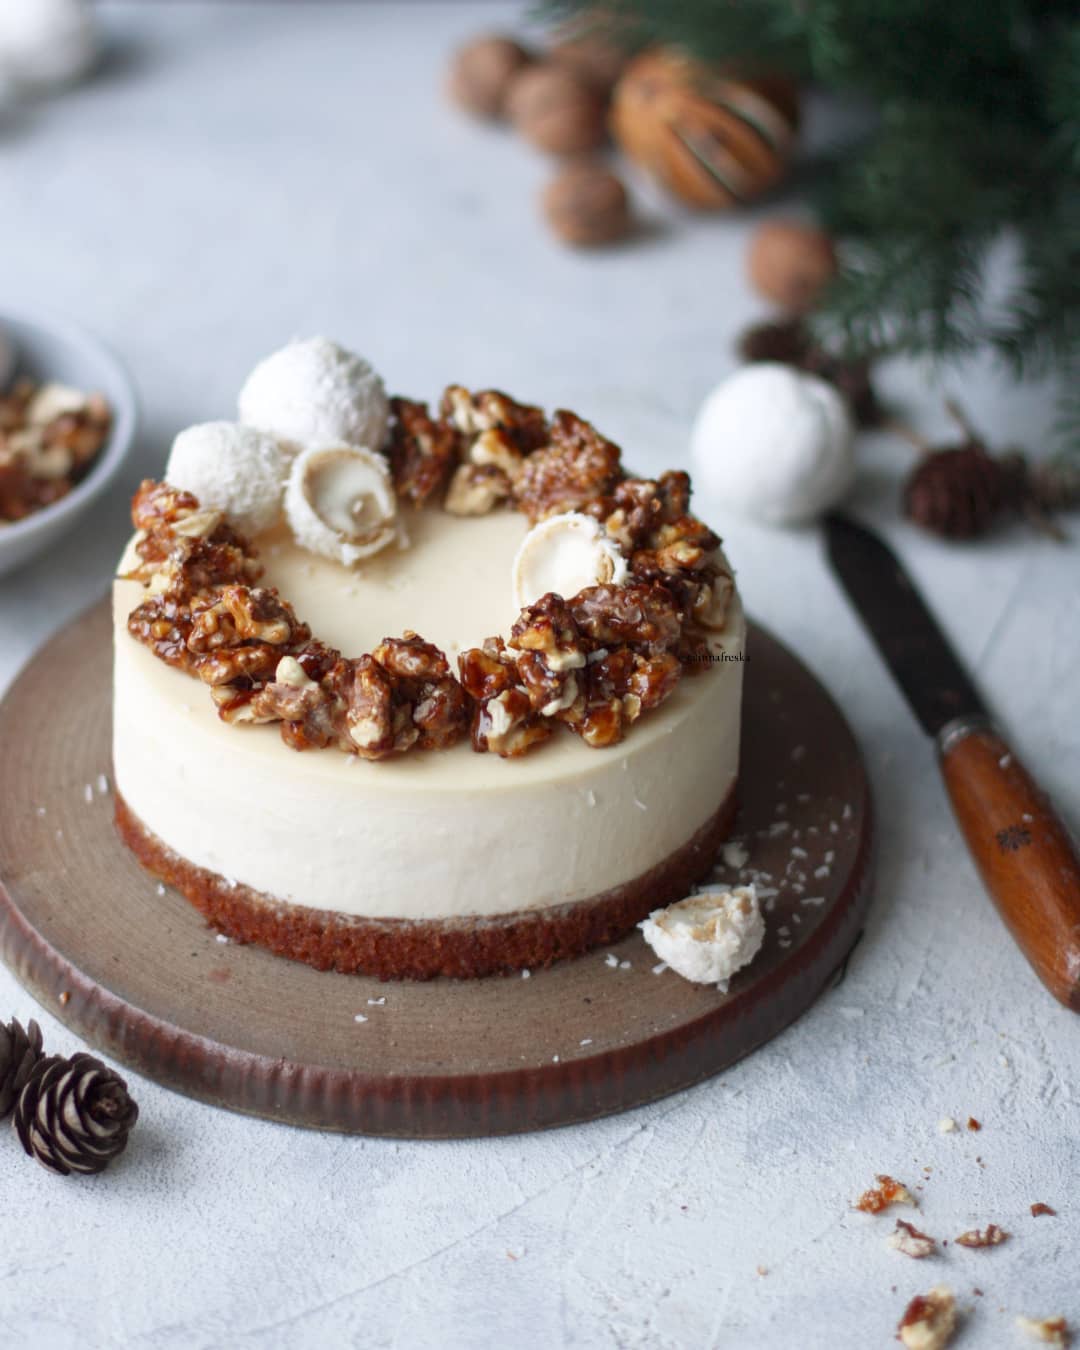 Winter coconut cheesecake with candied walnuts